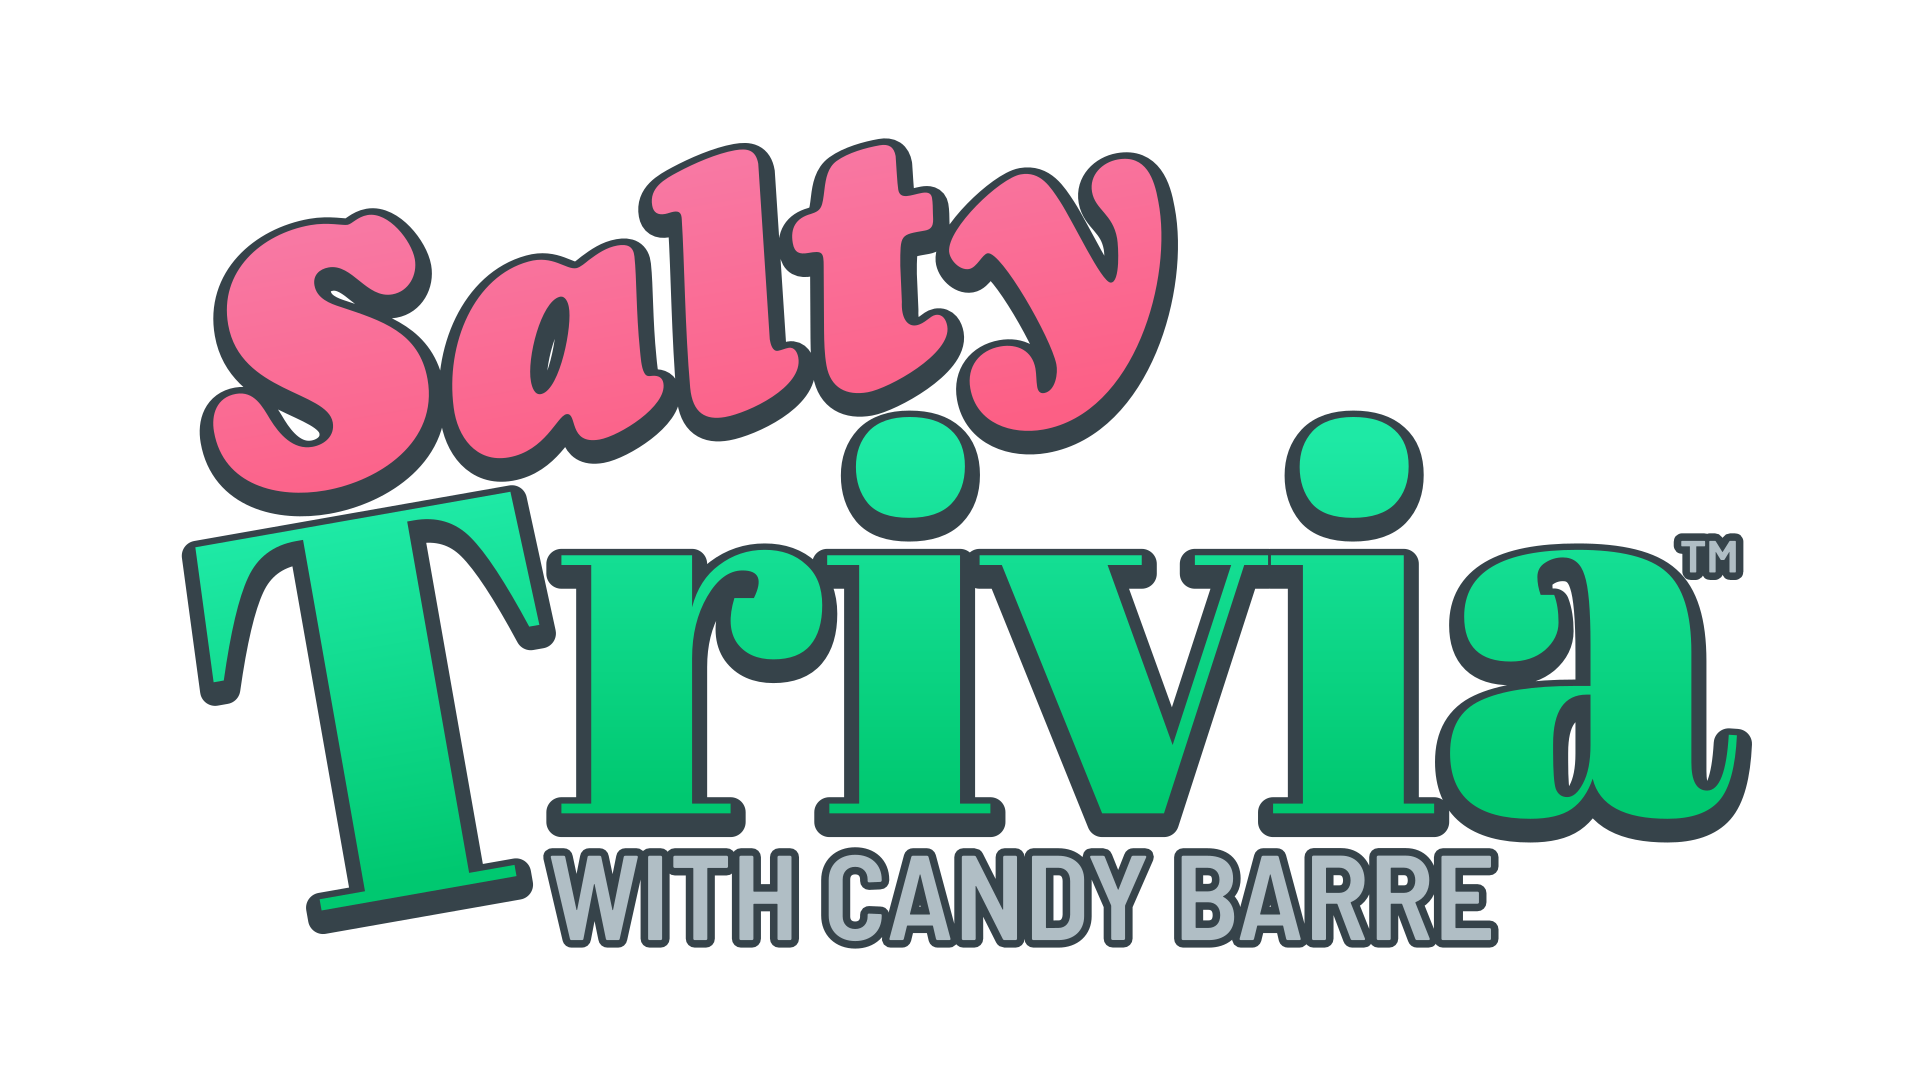 Salty Trivia with Candy Barre